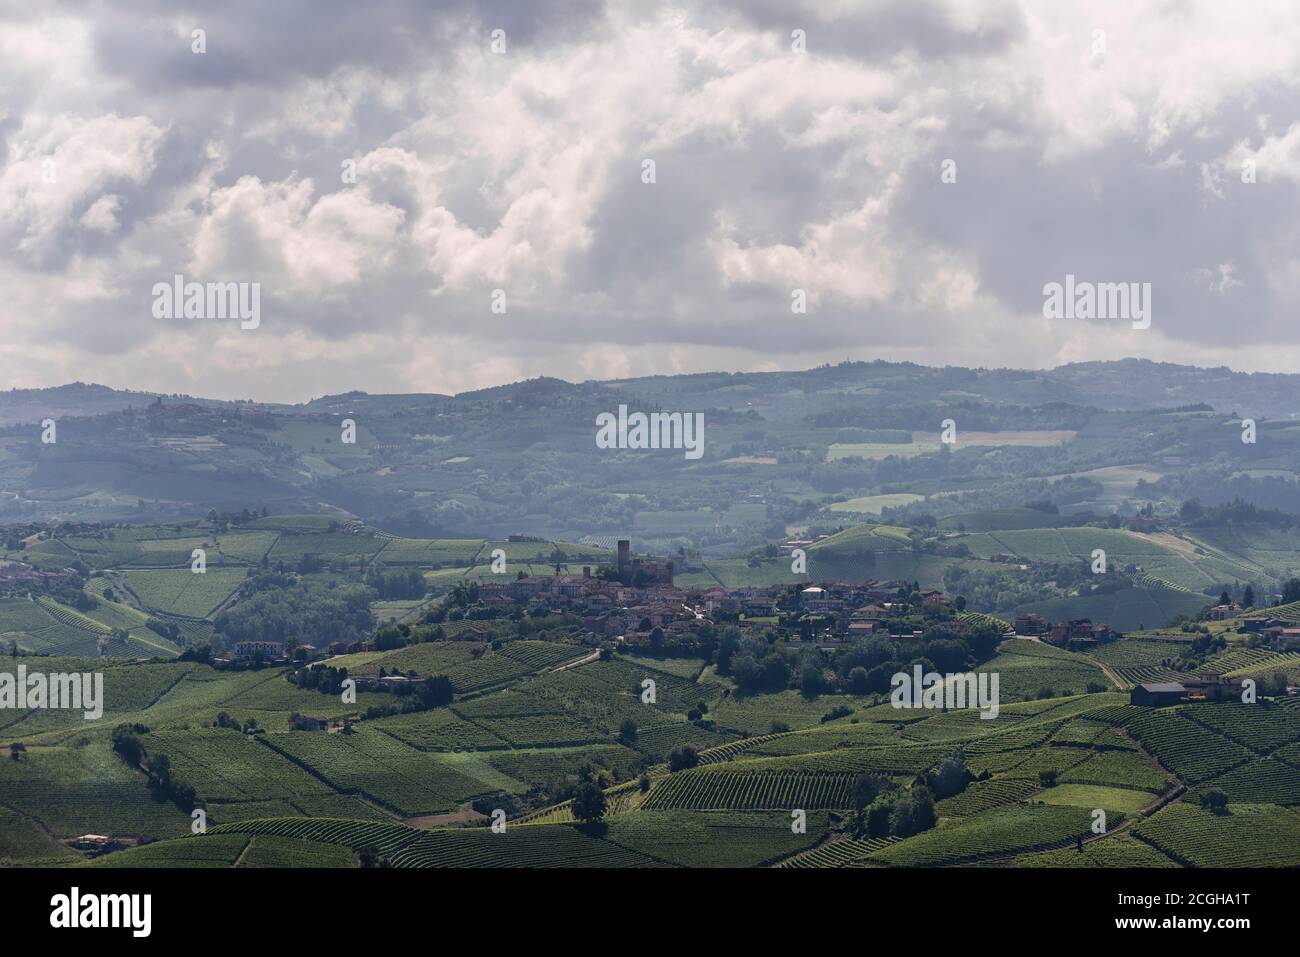 The vineyards and the lovely town of Barolo under a cloudy sky Stock Photo